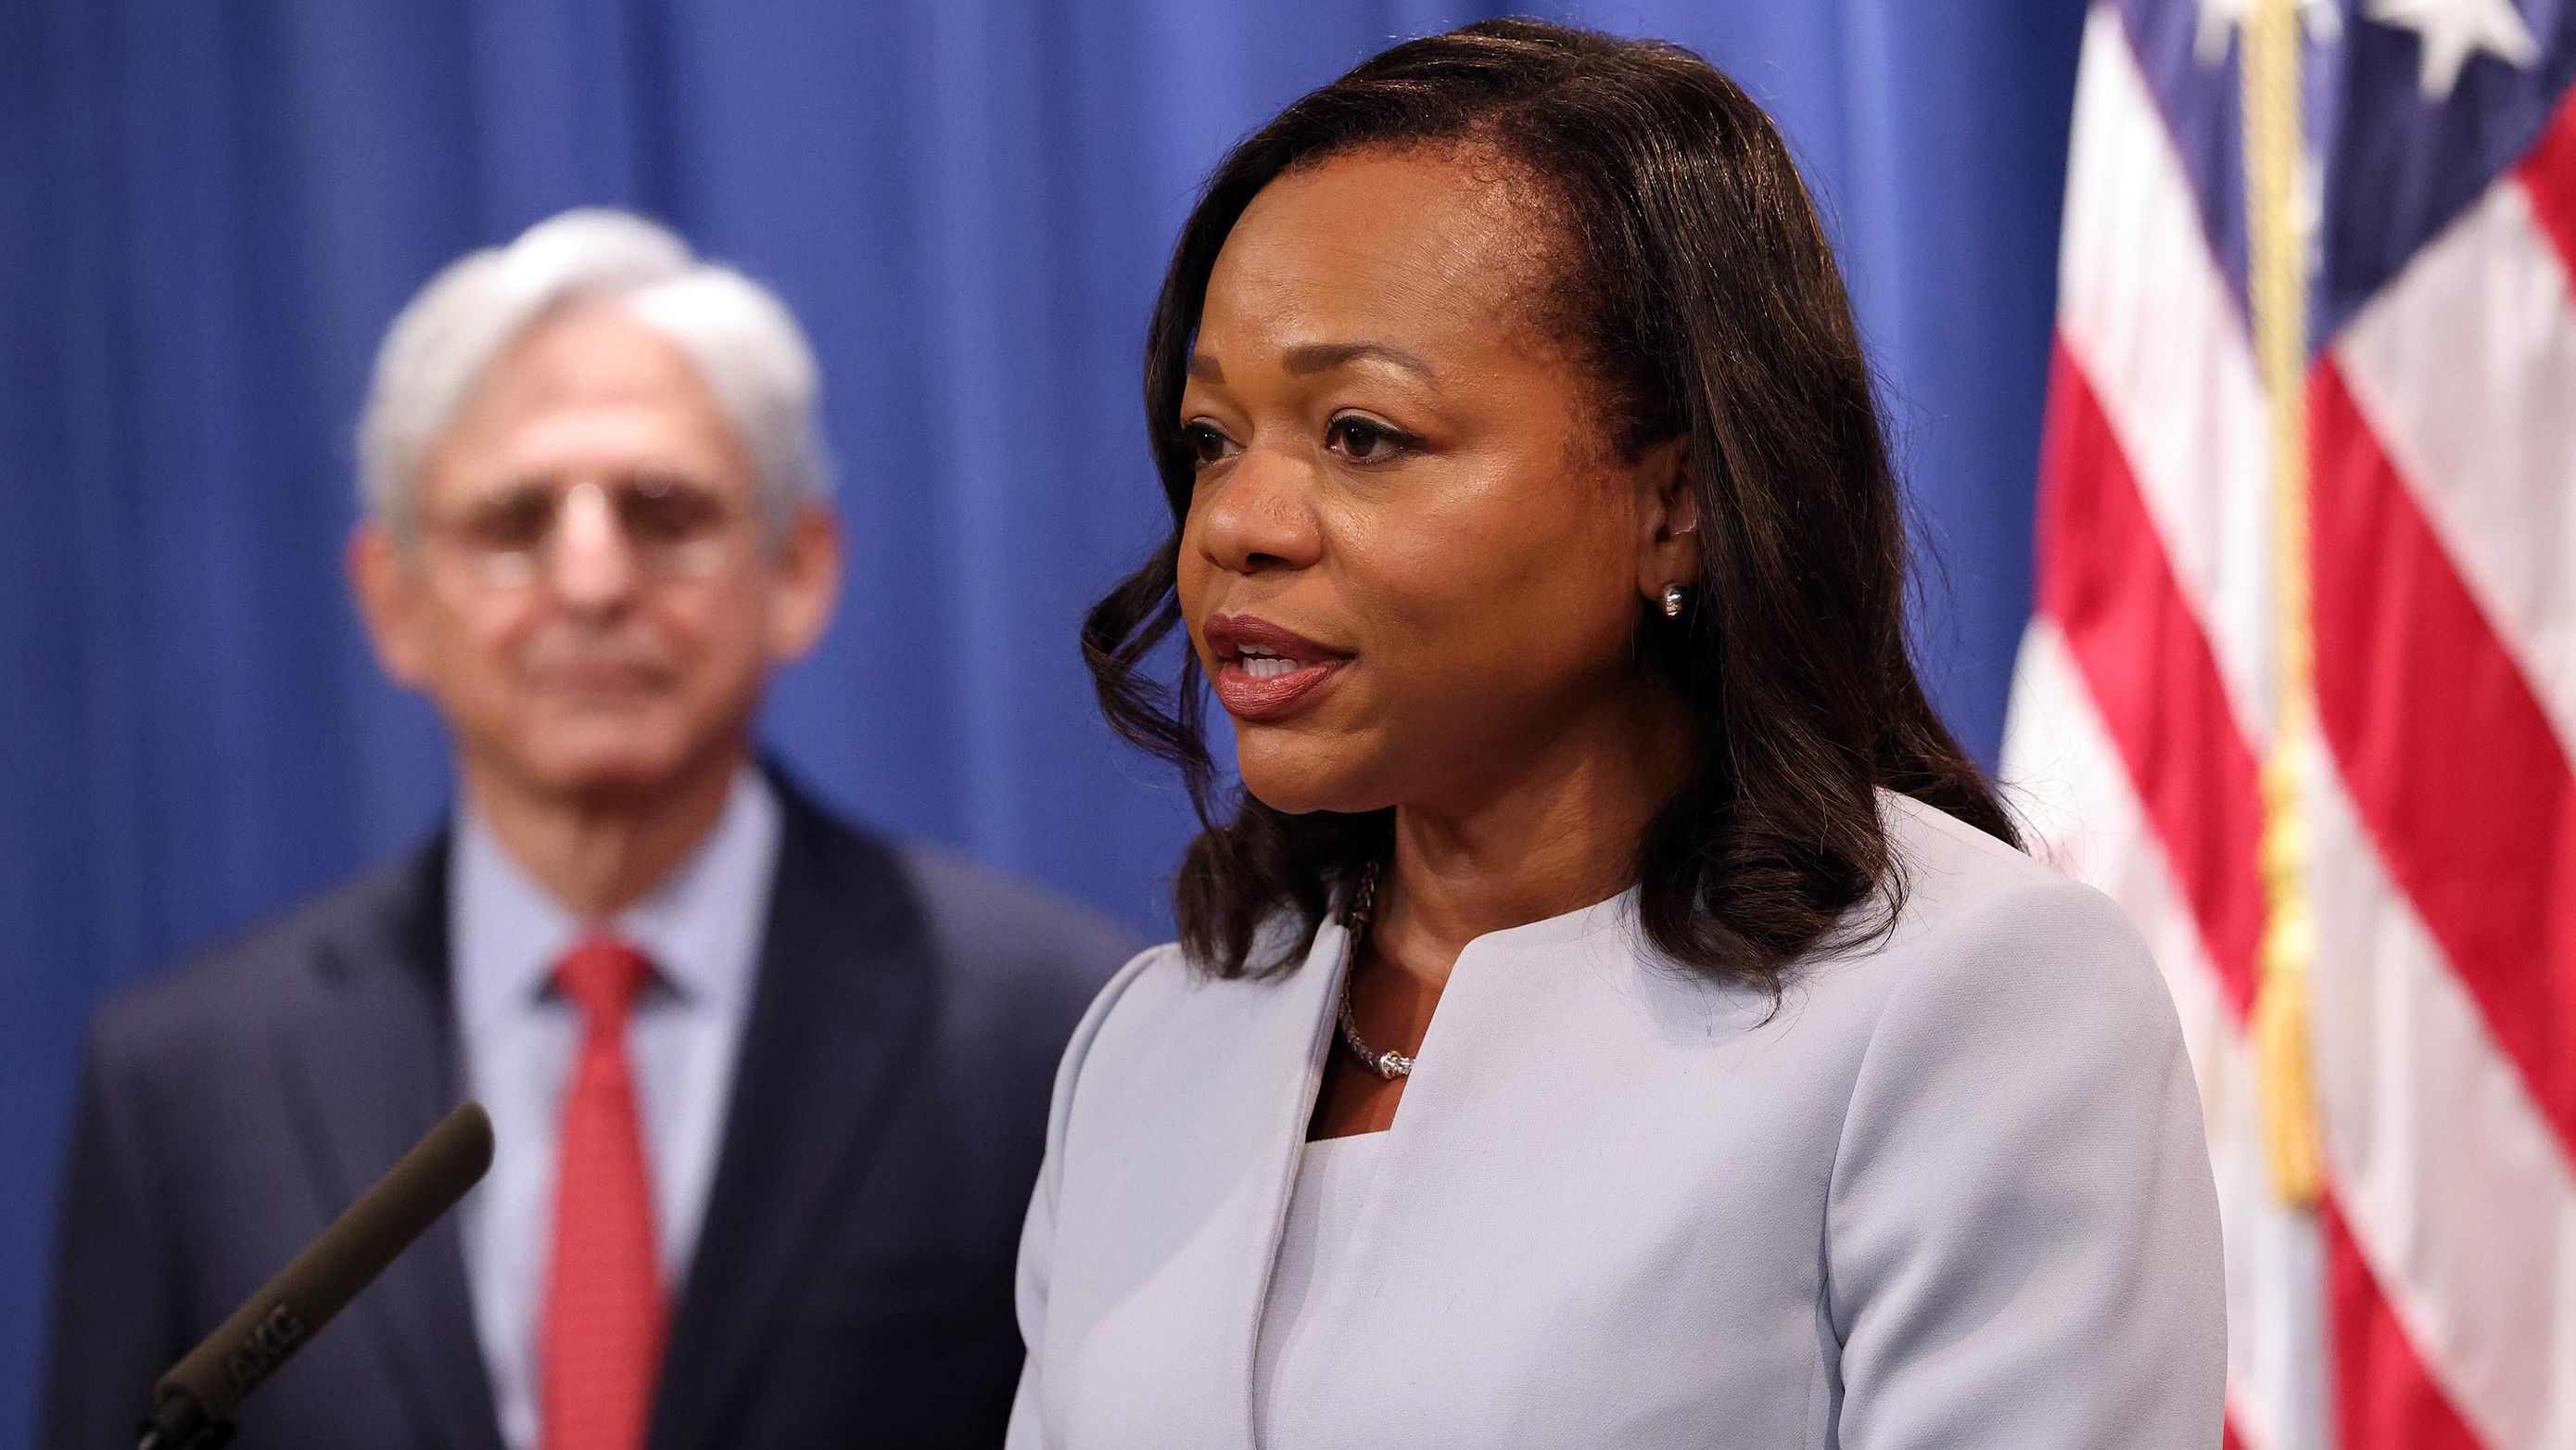 U.S. Assistant Attorney General for the Civil Rights Division Kristen Clarke speaking during a news conference at the Department of Justice on August 5, 2021 in Washington, DC.